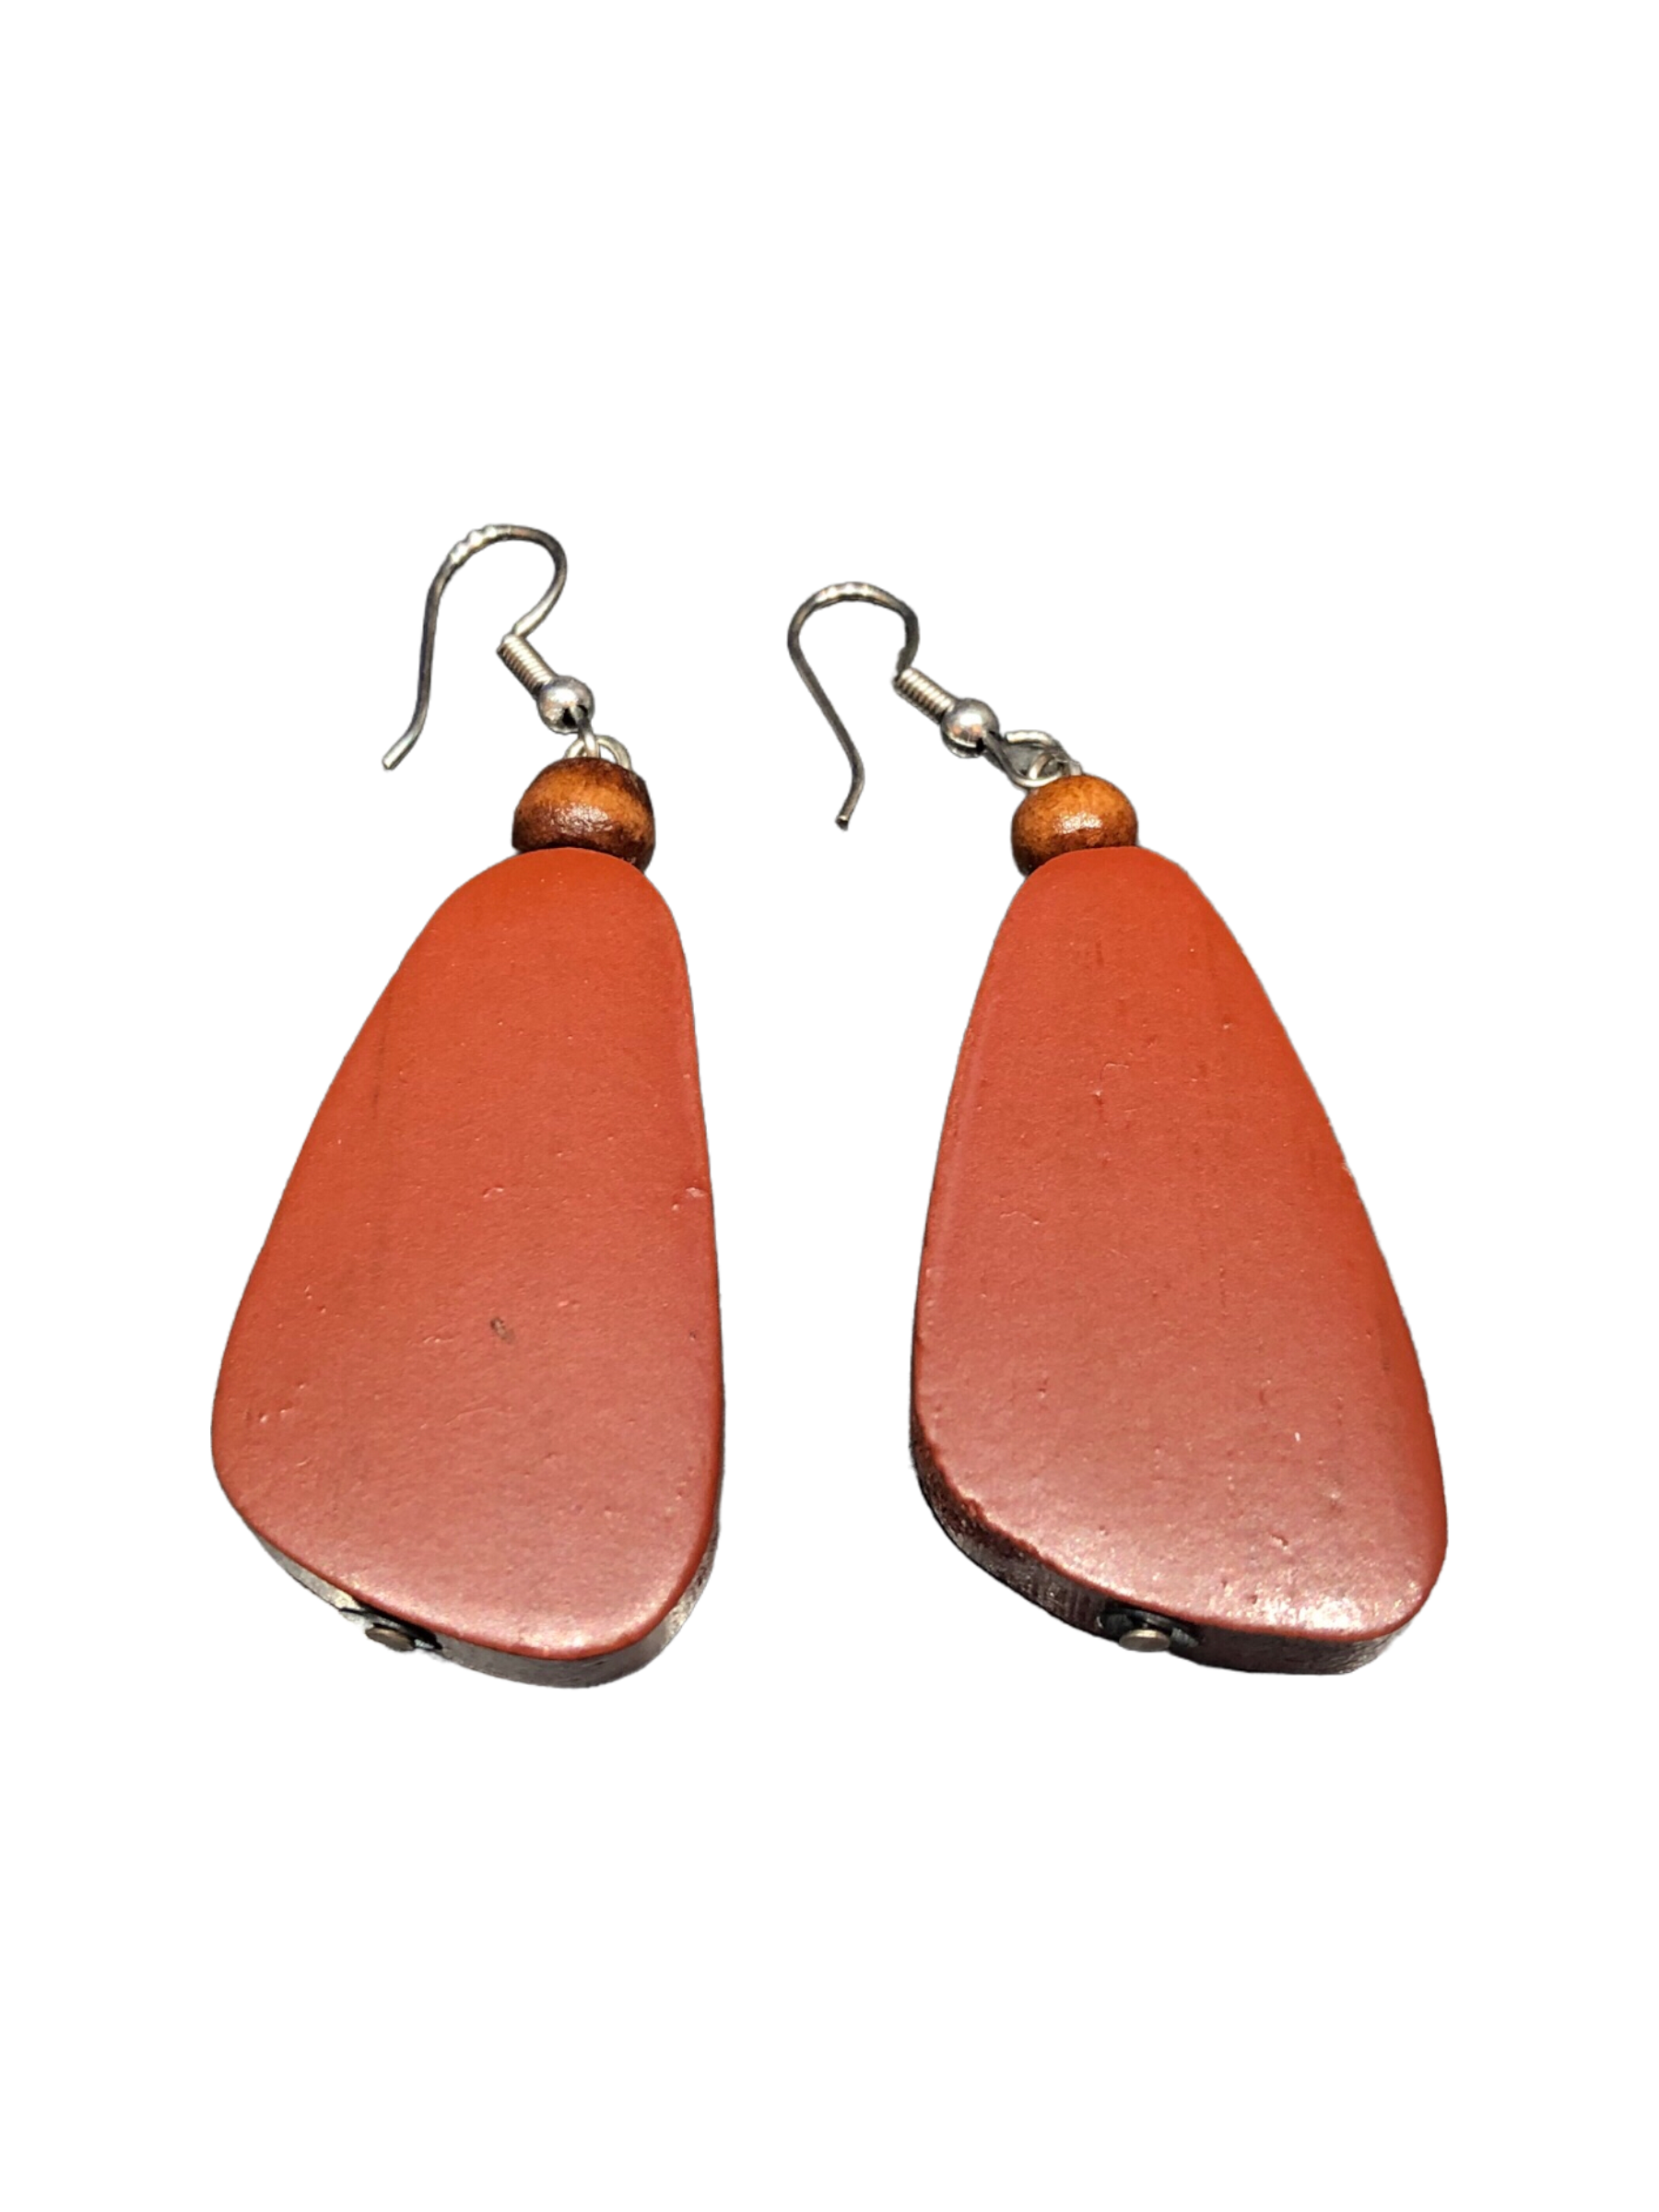 Brown Oblong Wooden Earrings - sariKNOTsari slow fashion bryn walker sorry not sorry linen Hamilton sustainable fashion gifts sari not sari Hamilton Fair trade  Ethical  Artisan made  Zero waste  Up-cycled Slow Fashion  Handmade  GTA Toronto Copper Pure Upcycled vintage silk handmade recycled recycle copper pure silk travel clothing hamilton vacation cruisewear resortwear bathing suit bathingsuit vacation etsy silk clothing gifts gift dress top pants linen bryn walker alive intentions kaarigar elephants